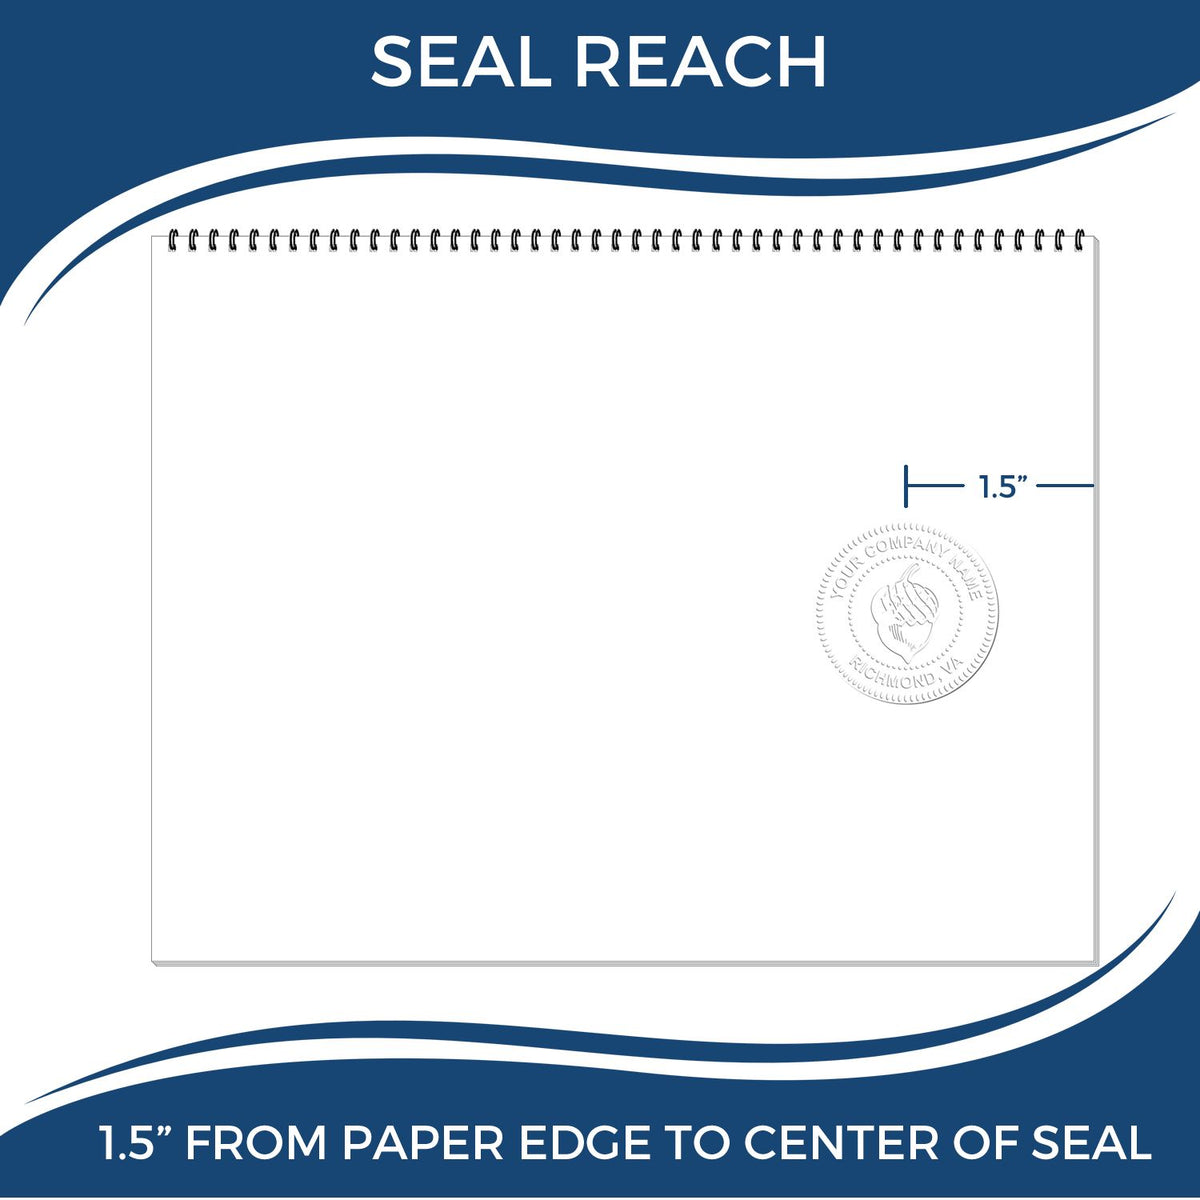 An infographic showing the seal reach which is represented by a ruler and a miniature seal image of the Hybrid Kentucky Geologist Seal